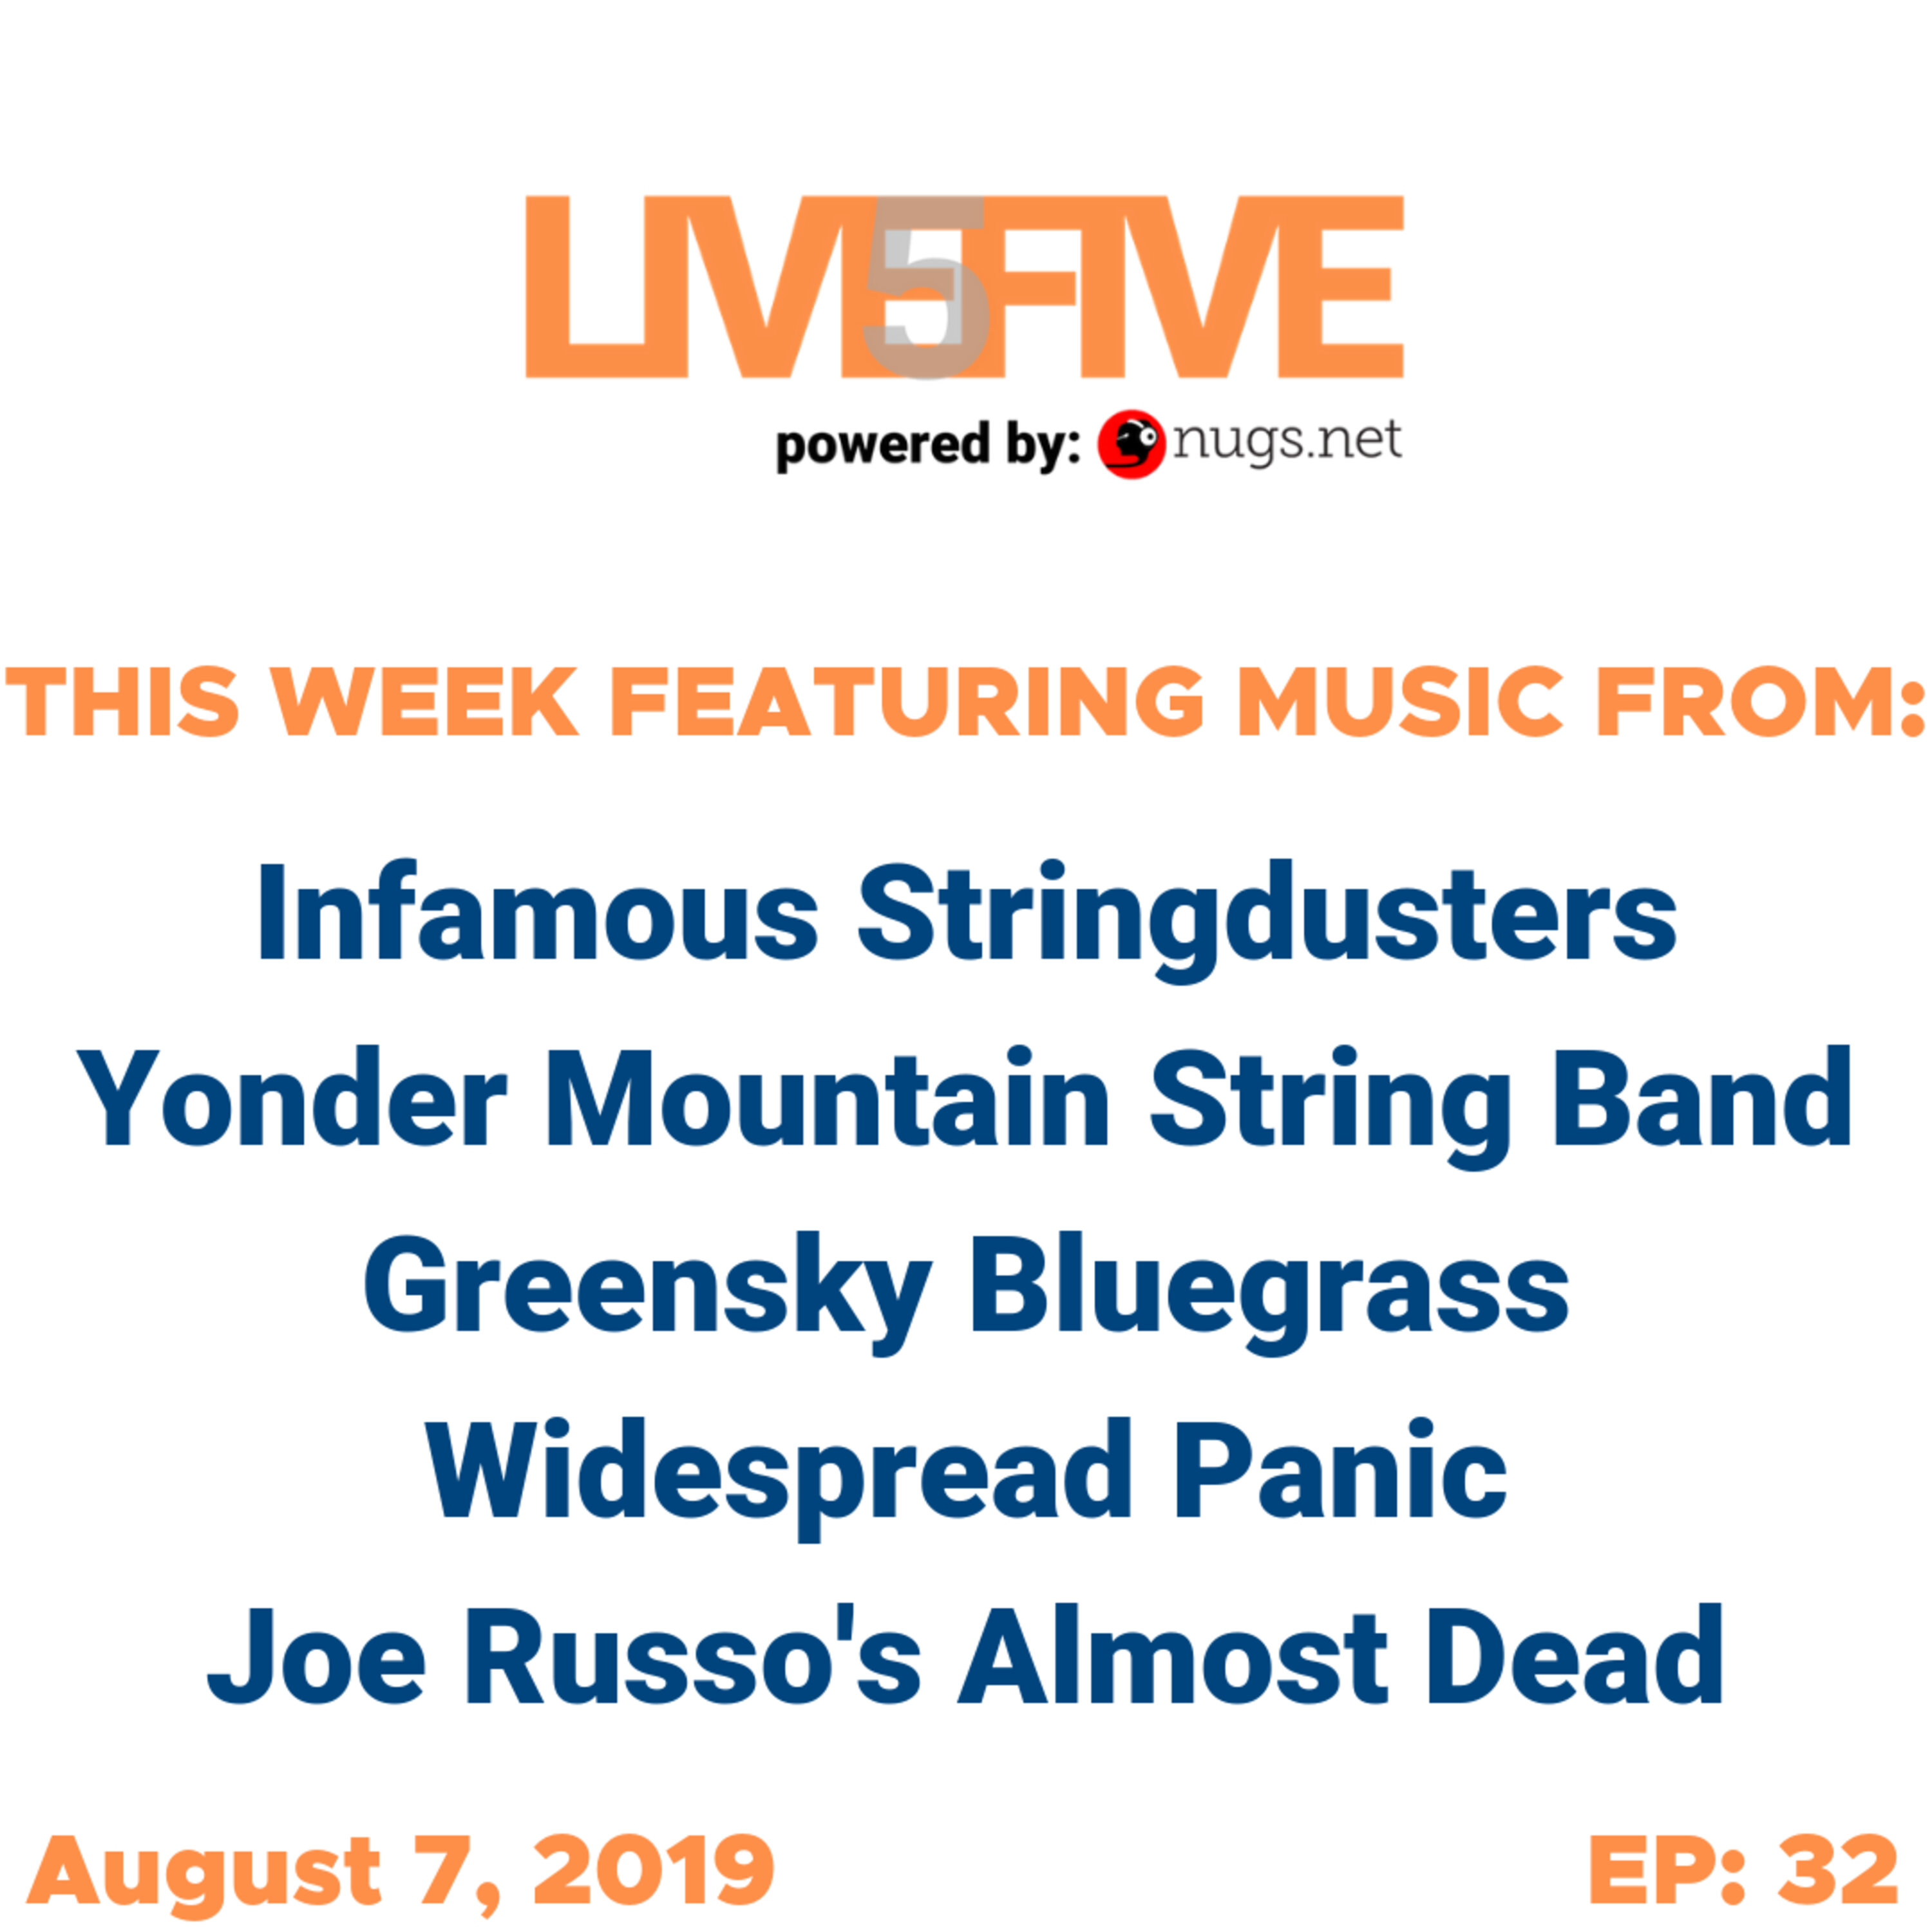 Live 5 - August 7, 2019. Image